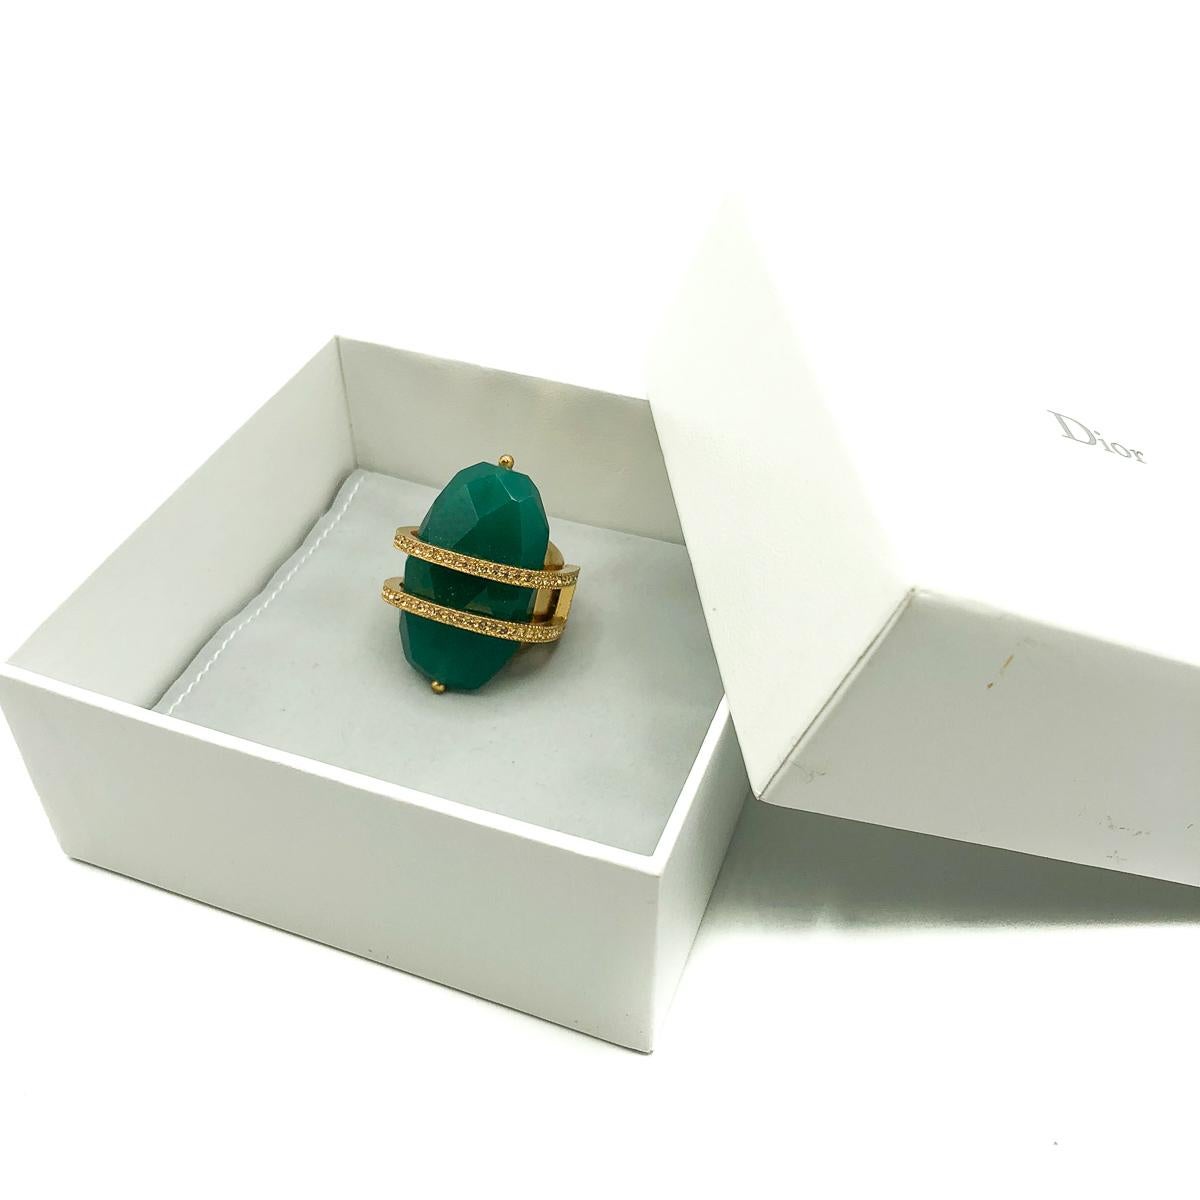 A Vintage Dior Cocktail Ring. Featuring a huge faceted green stock, almost rock like in it's proportions. Suspended by a crystal embellished double ring that circles around the stone to meet the wonderfully broad style shank. In gold plated metal.